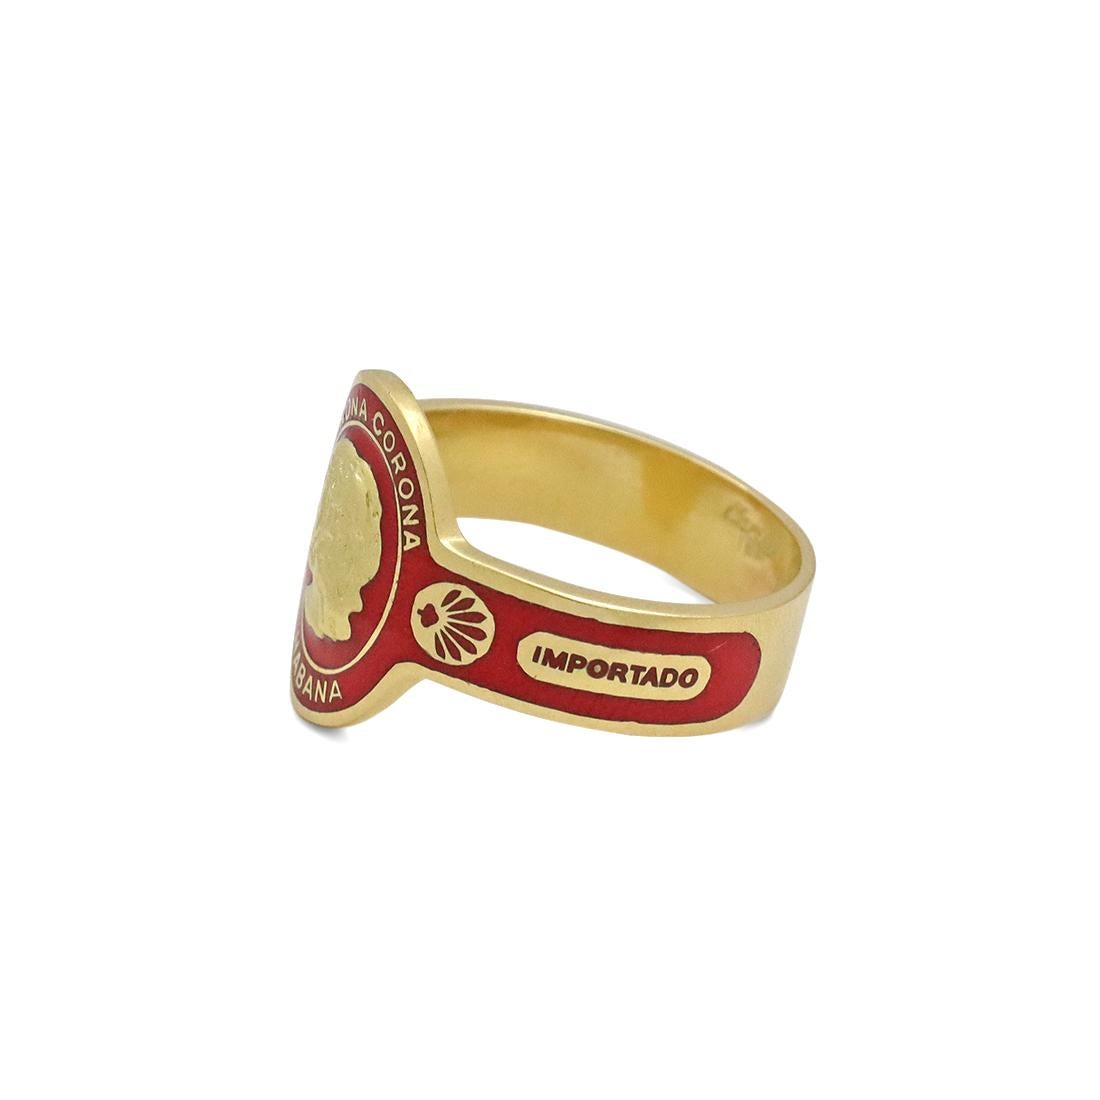 Authentic Cartier 'Corona Corona Habana' enamel ring crafted in 18 karat yellow gold. This whimsical ring is emblazoned with the logo of the 'Corona Habana' cigar. The ring is a size 64 EU, 10.5 US. Signed Cartier, 18K. The ring is not presented